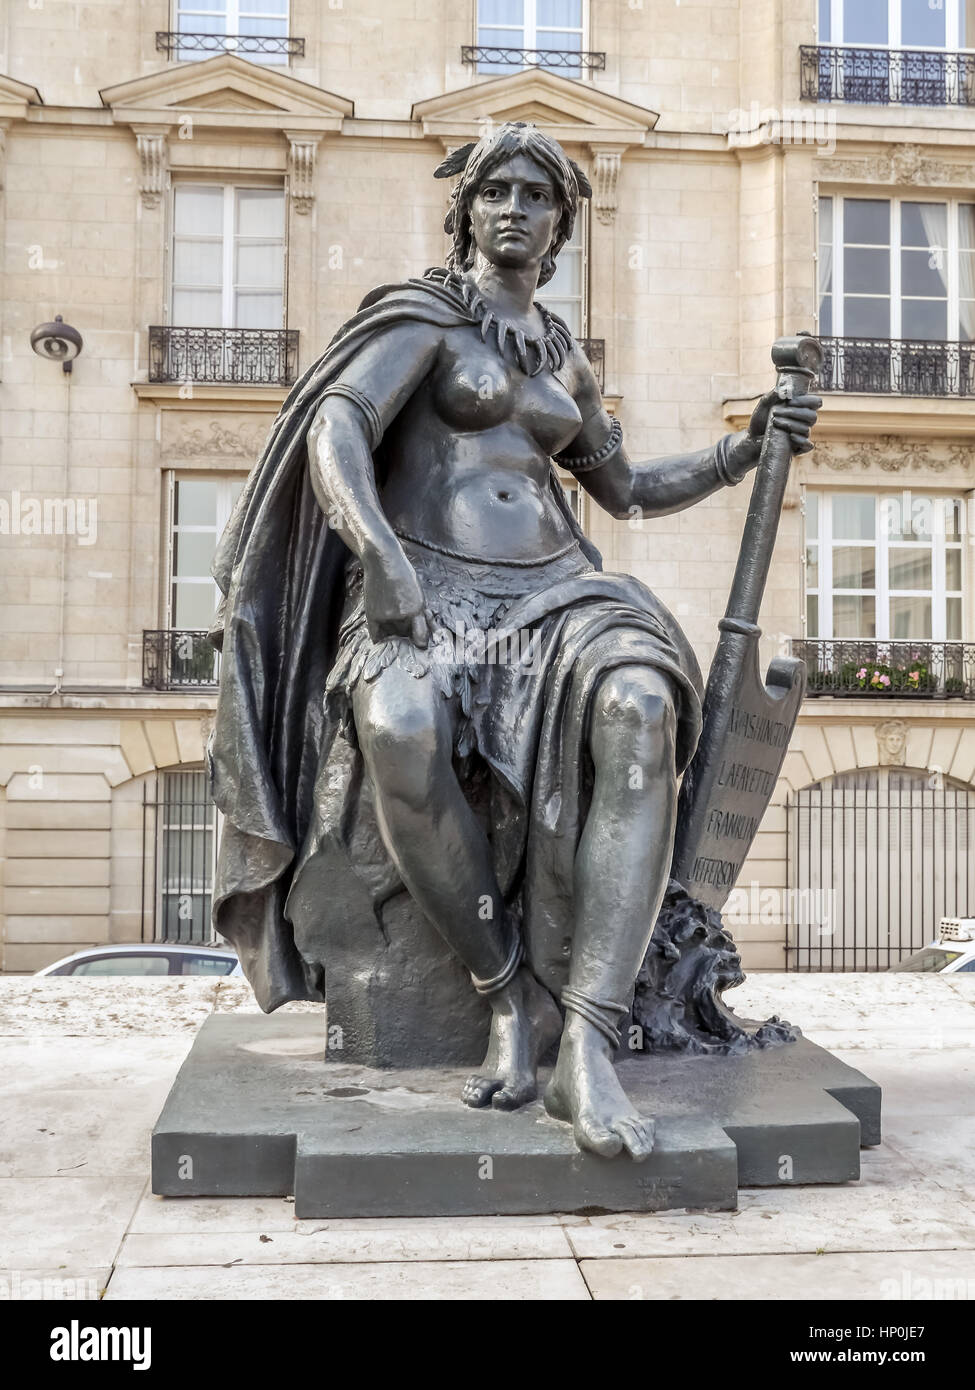 PARIS, FRANCE - 25 AUGUST, 2013 - One of six statues representing six continents - North America, outside of d'Orsay Museum, Paris, France Stock Photo